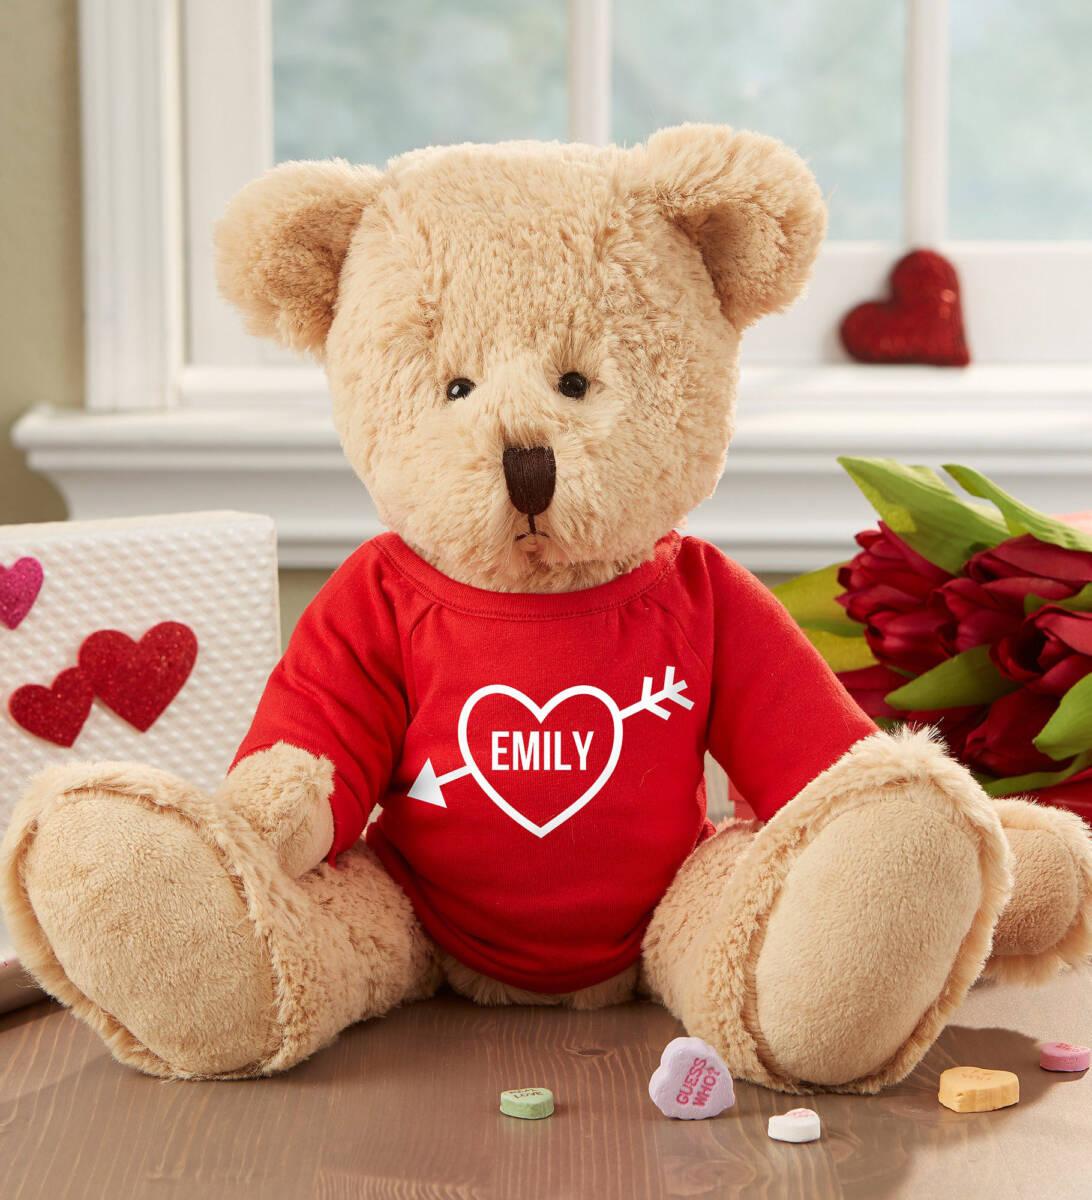 valentine's day gift ideas with personalized teddy bear